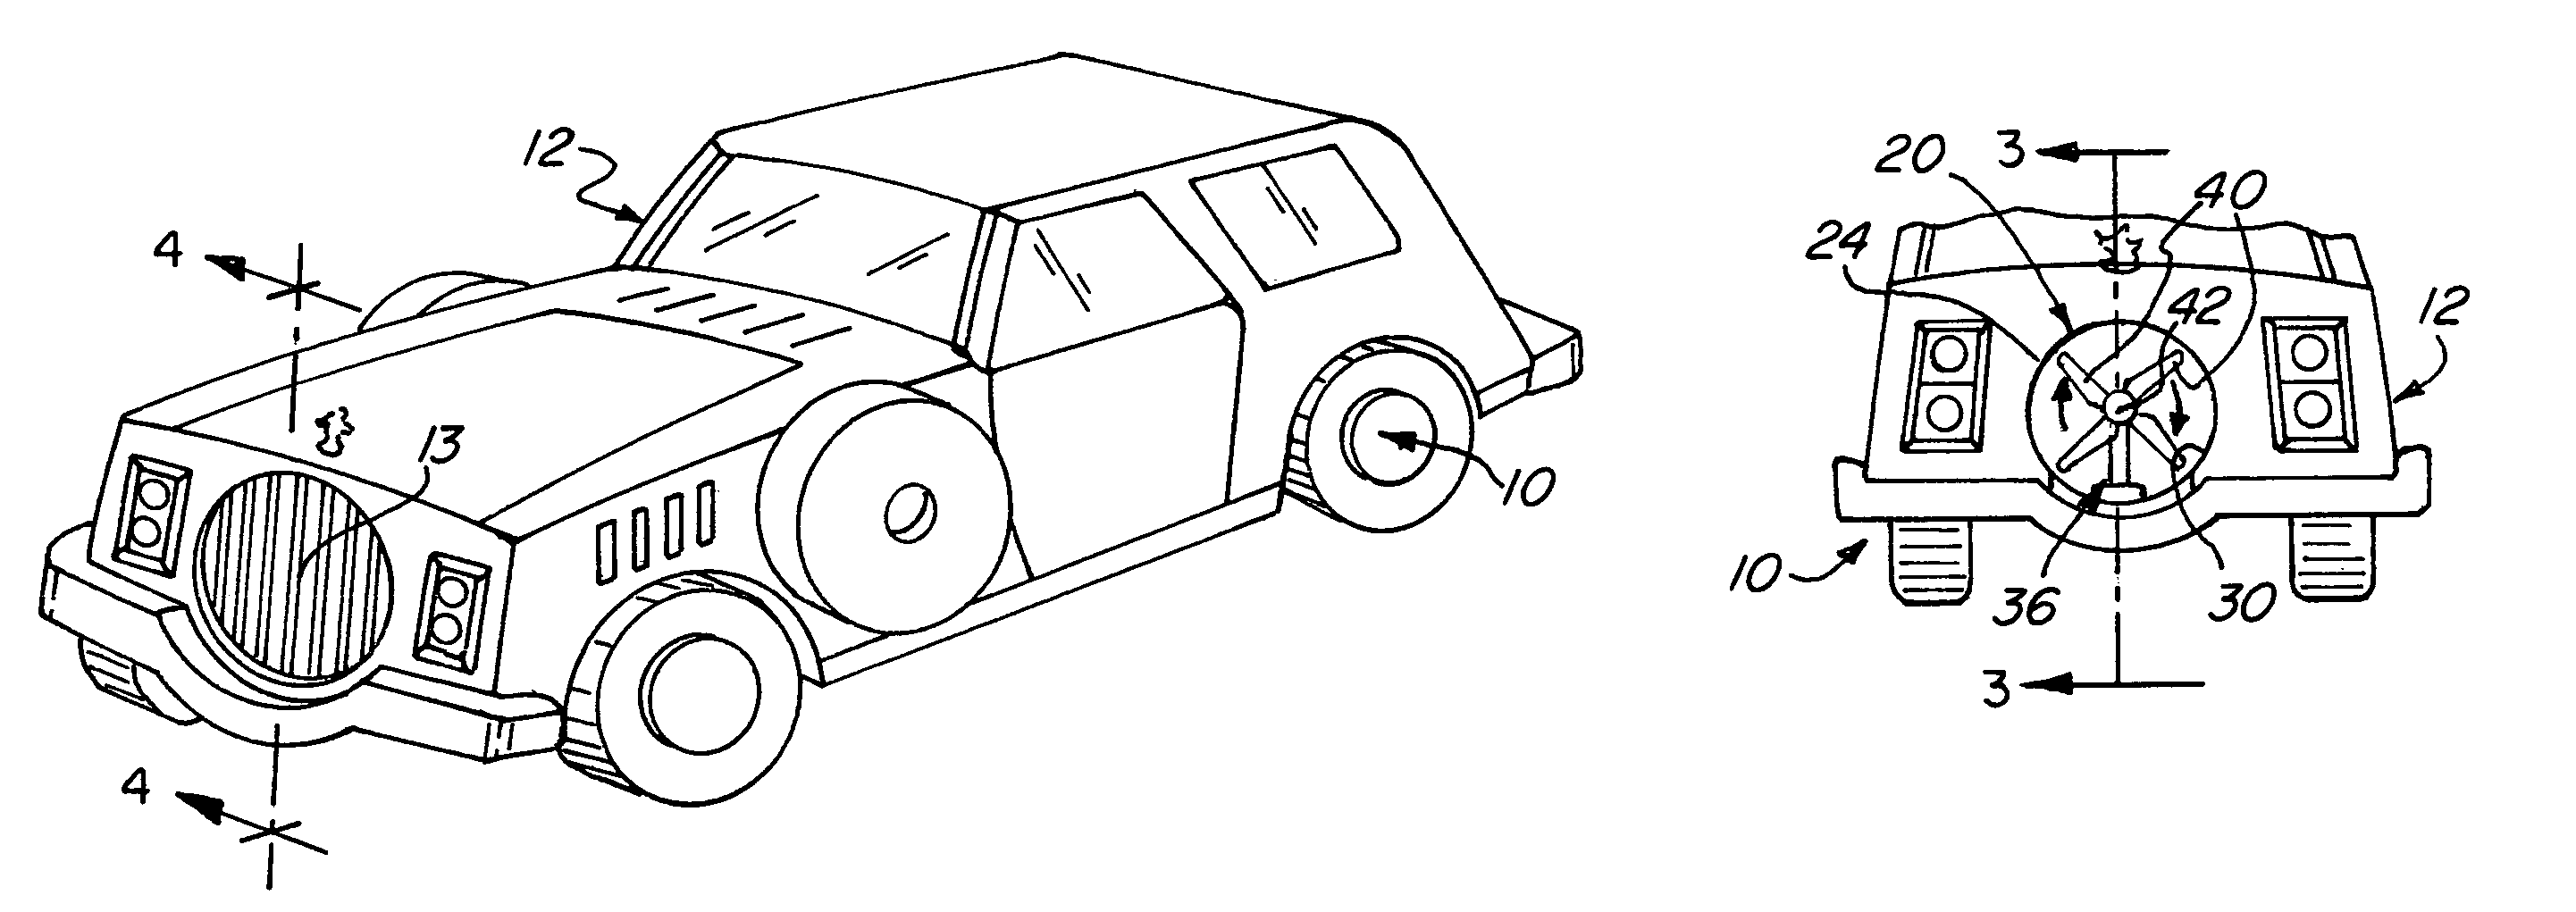 Recharging system for electrically powered vehicle, and vehicle incorporating same